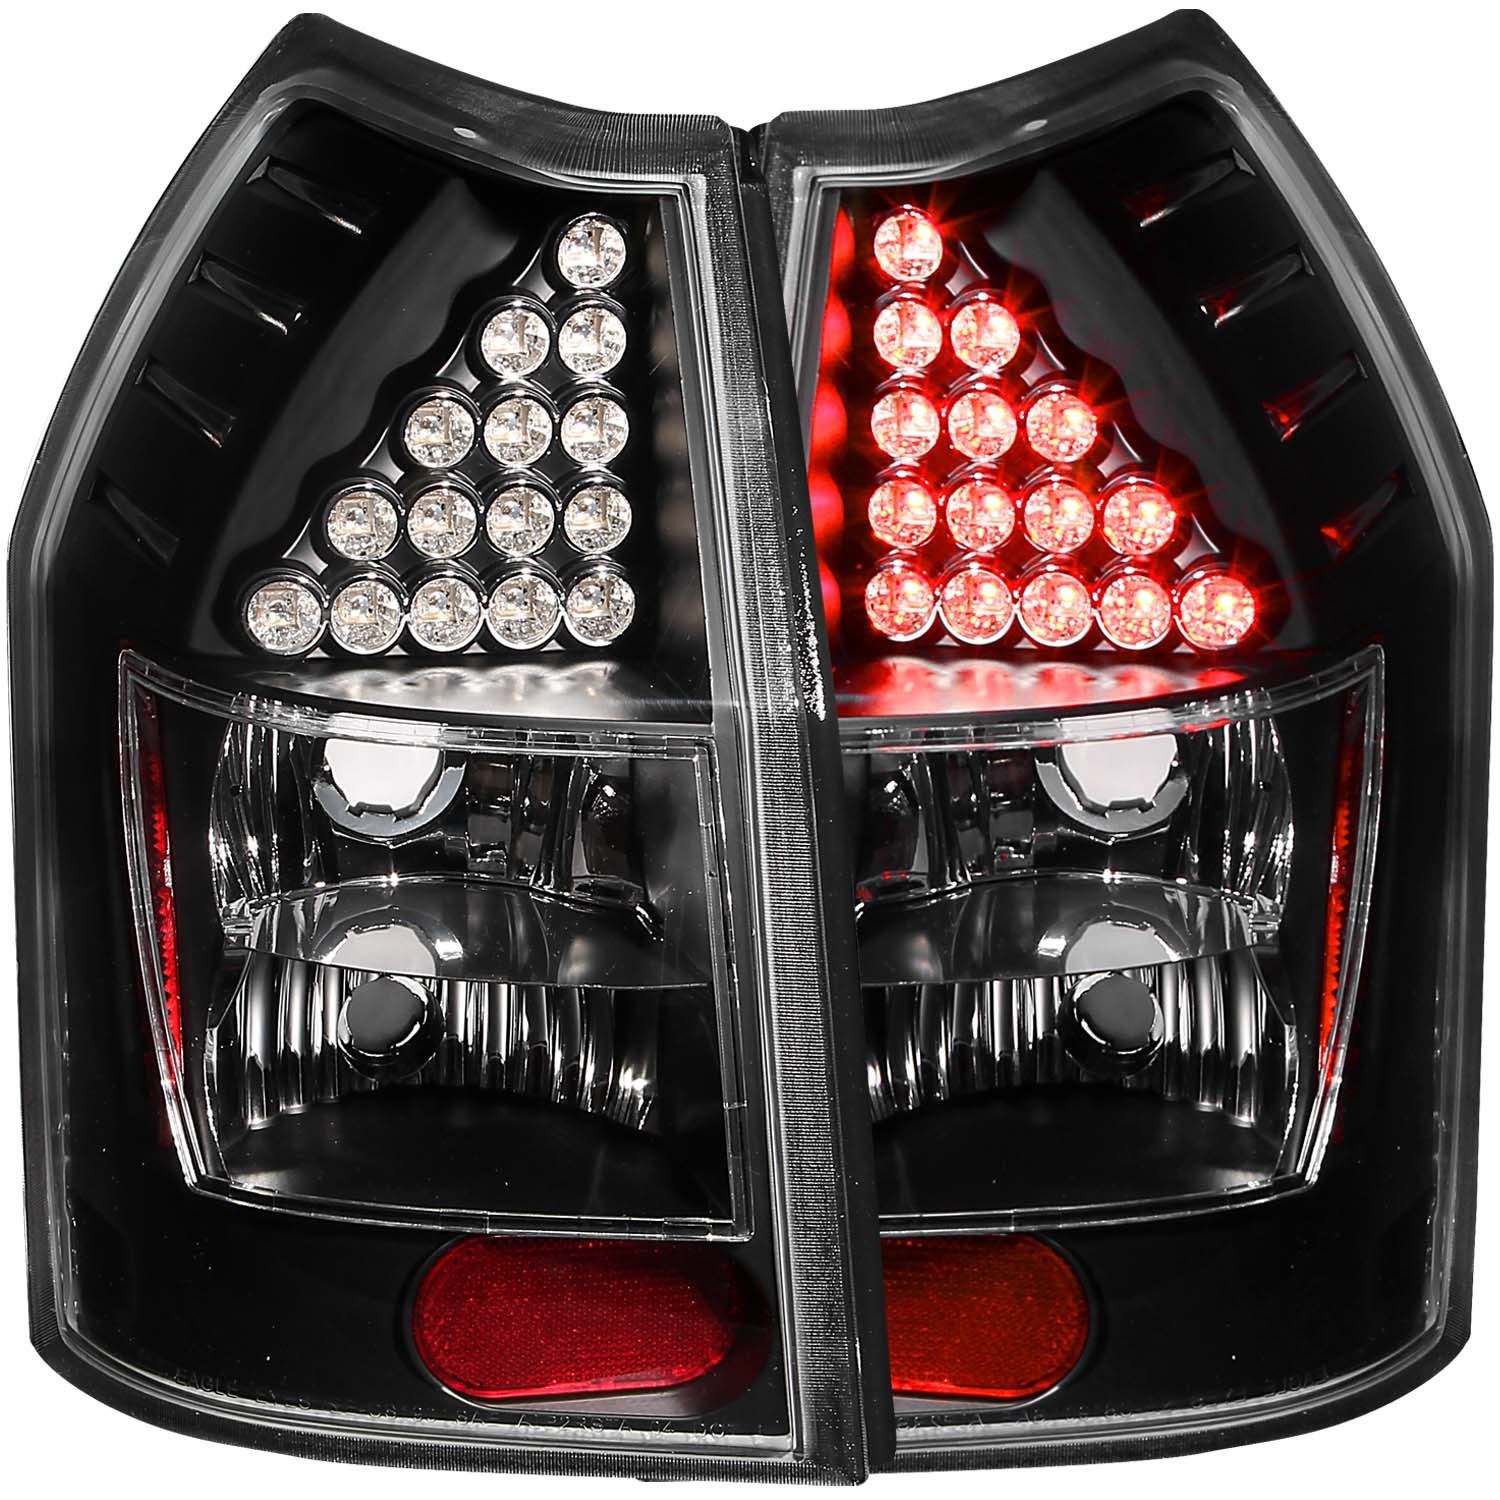 Anzo USA 321017 Tail Light Assembly Fits 05-08 Magnum